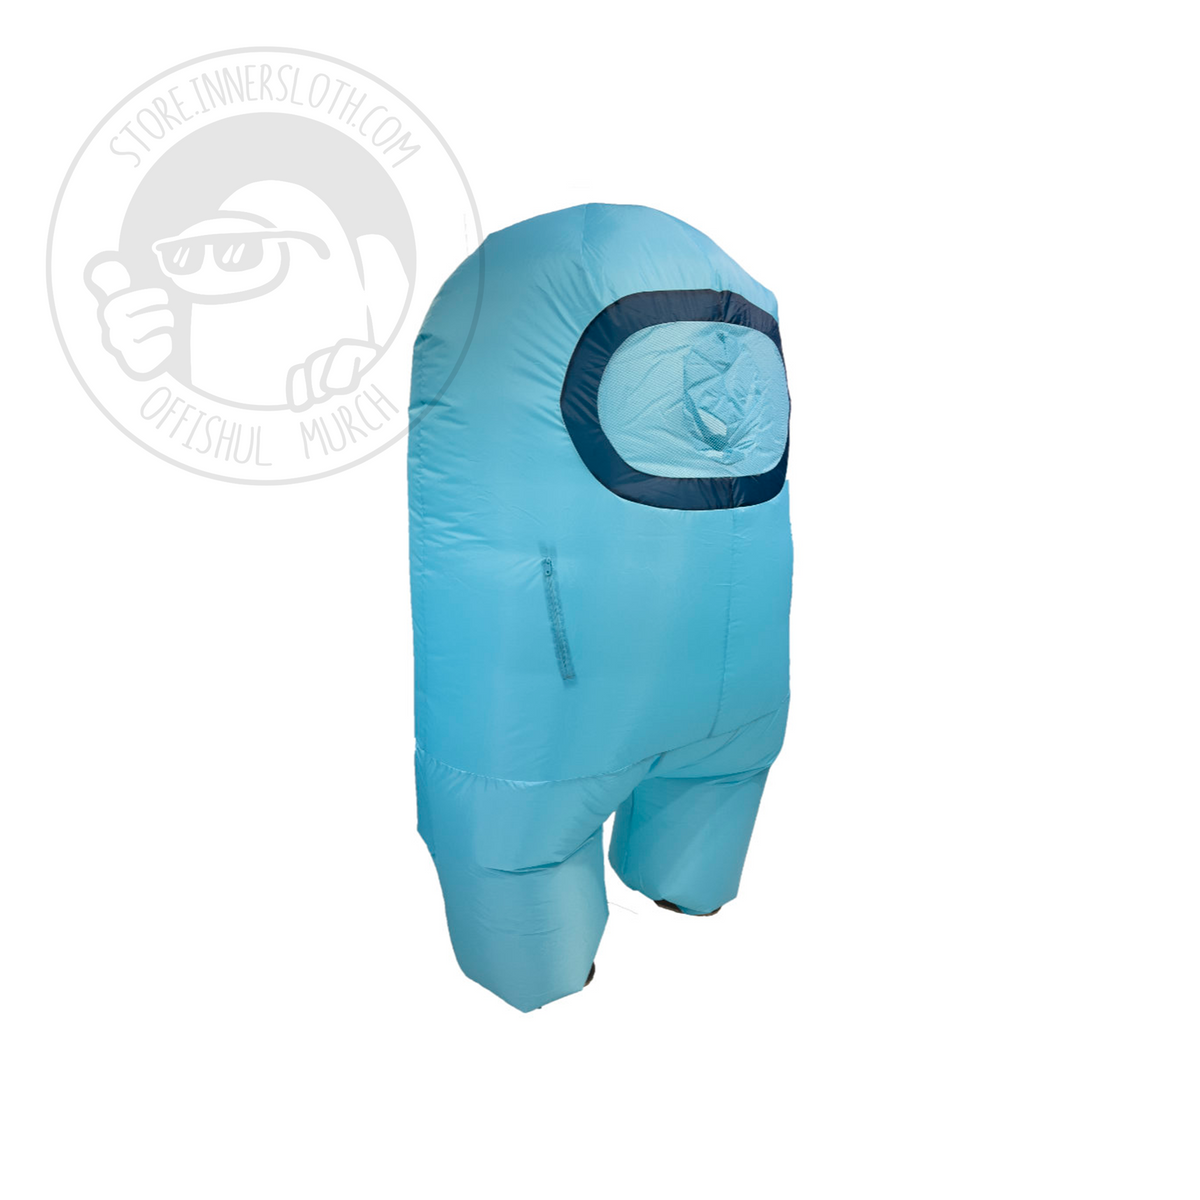 Three-Quarter view of the Cyan children-sized inflatable Crewmate costume.